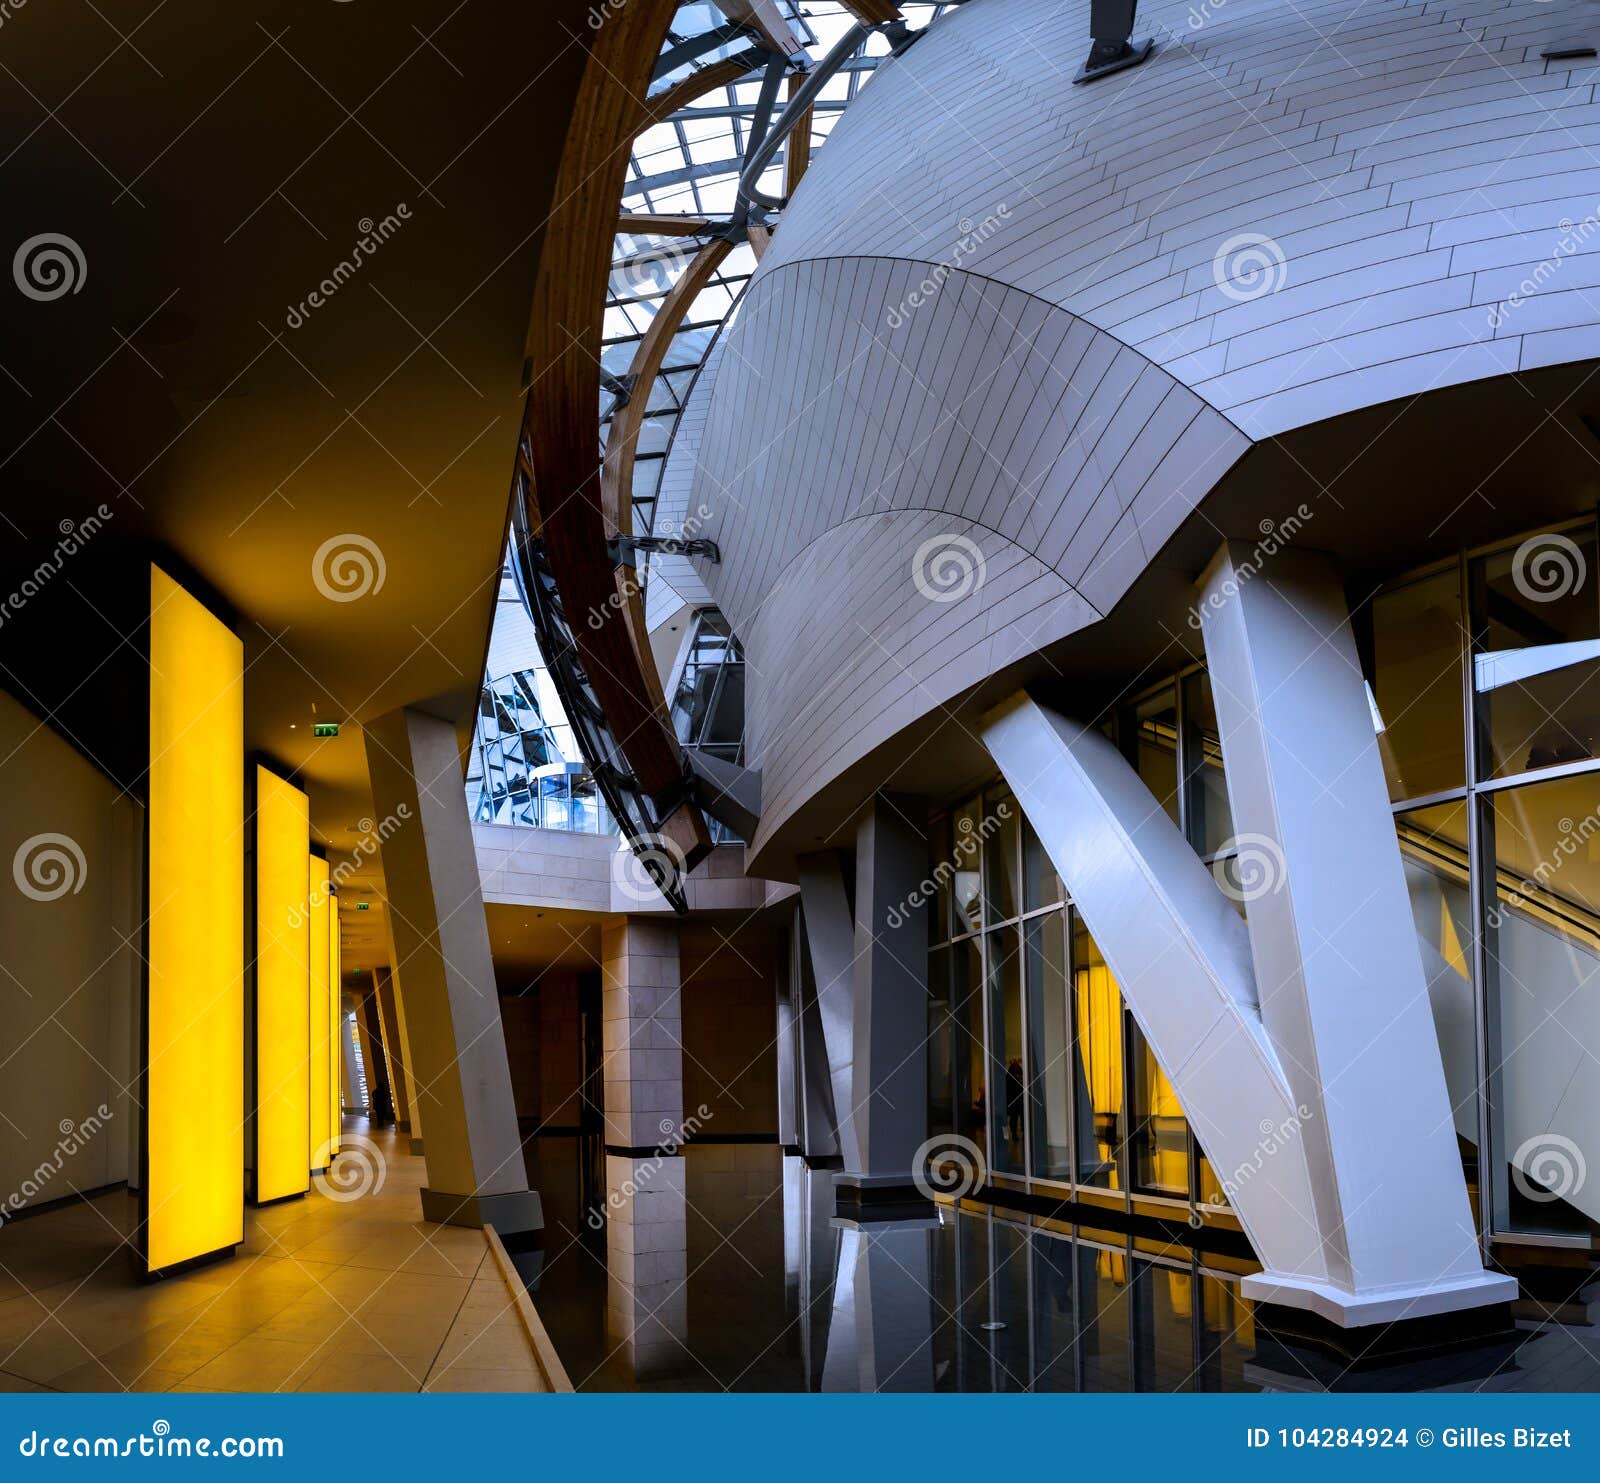 The Building of the Louis Vuitton Foundation Editorial Stock Image